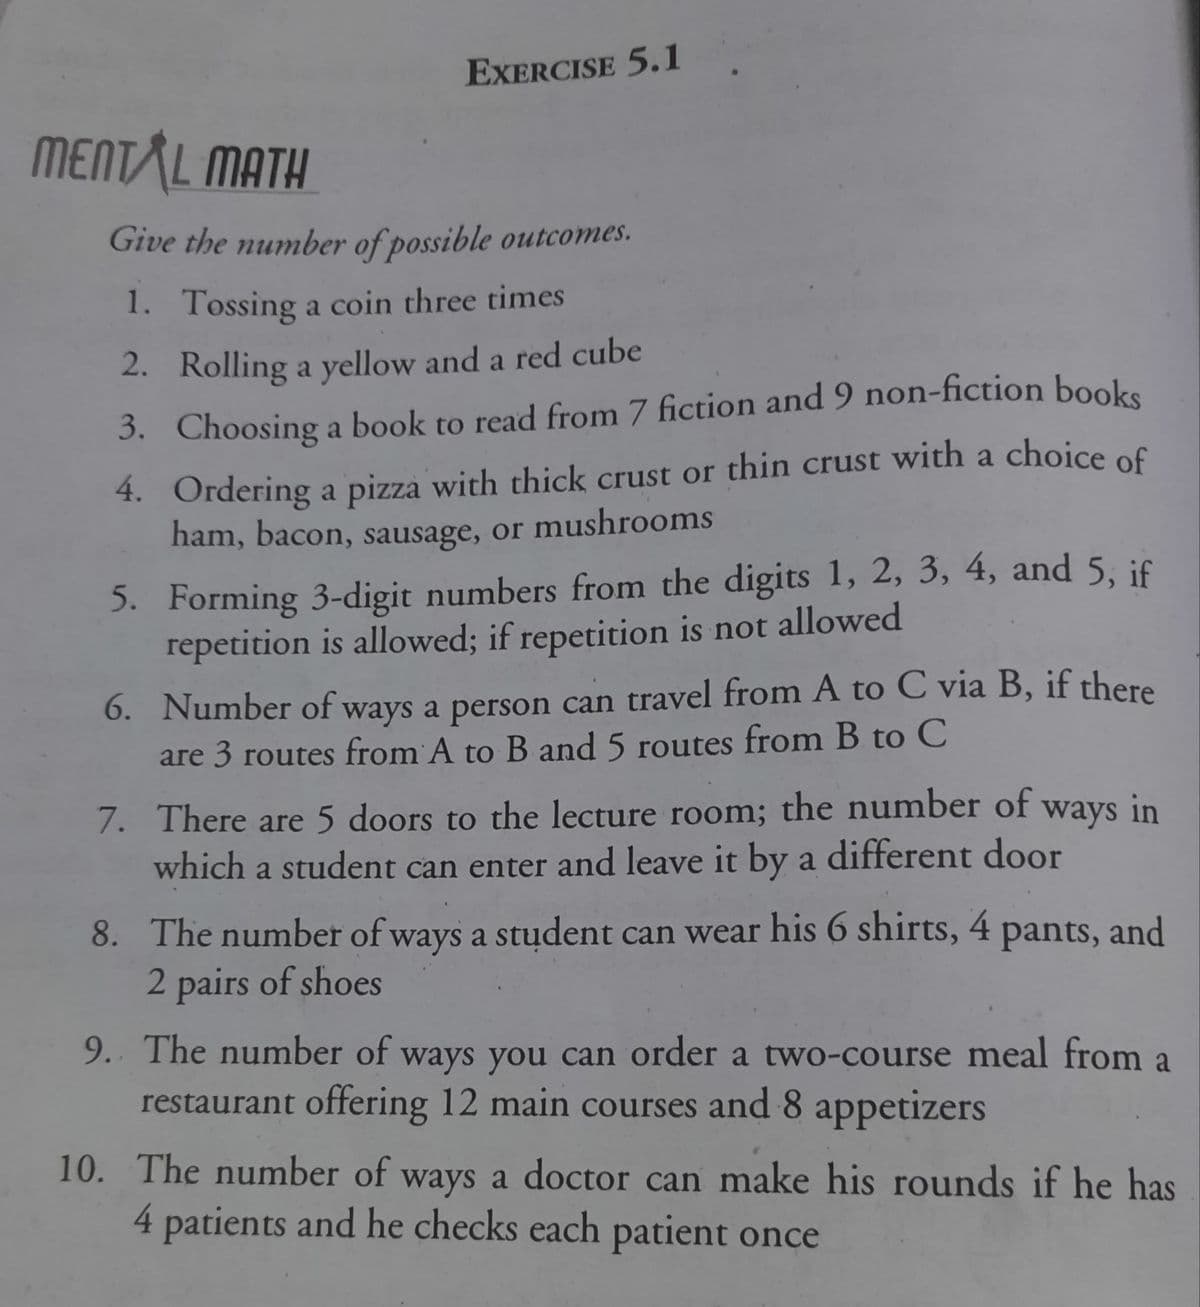 EXERCISE 5.1
MENTAL MATH
Give the number of possible outcomes.
1. Tossing a coin three times
2. Rolling a yellow and a red cube
3. Choosing a book to read from 7 fiction and 9 non-fiction booke
4. Ordering a pizza with thick crust or thin crust with a choice of
ham, bacon, sausage, or mushrooms
5. Forming 3-digit numbers from the digits 1, 2, 3, 4, and 5, jf
repetition is allowed; if repetition is not allowed
6. Number of ways a person can travel from A to C via B, if there
are 3 routes from A to B and 5 routes from B to C
7. There are 5 doors to the lecture room; the number of
ways
in
which a student can enter and leave it by a different door
8. The number of ways a student can wear his 6 shirts, 4 pants, and
2 pairs of shoes
9. The number of ways you can order a two-course meal from a
restaurant offering 12 main courses and 8 appetizers
10. The number of ways a doctor can make his rounds if he has
4 patients and he checks each patient once
